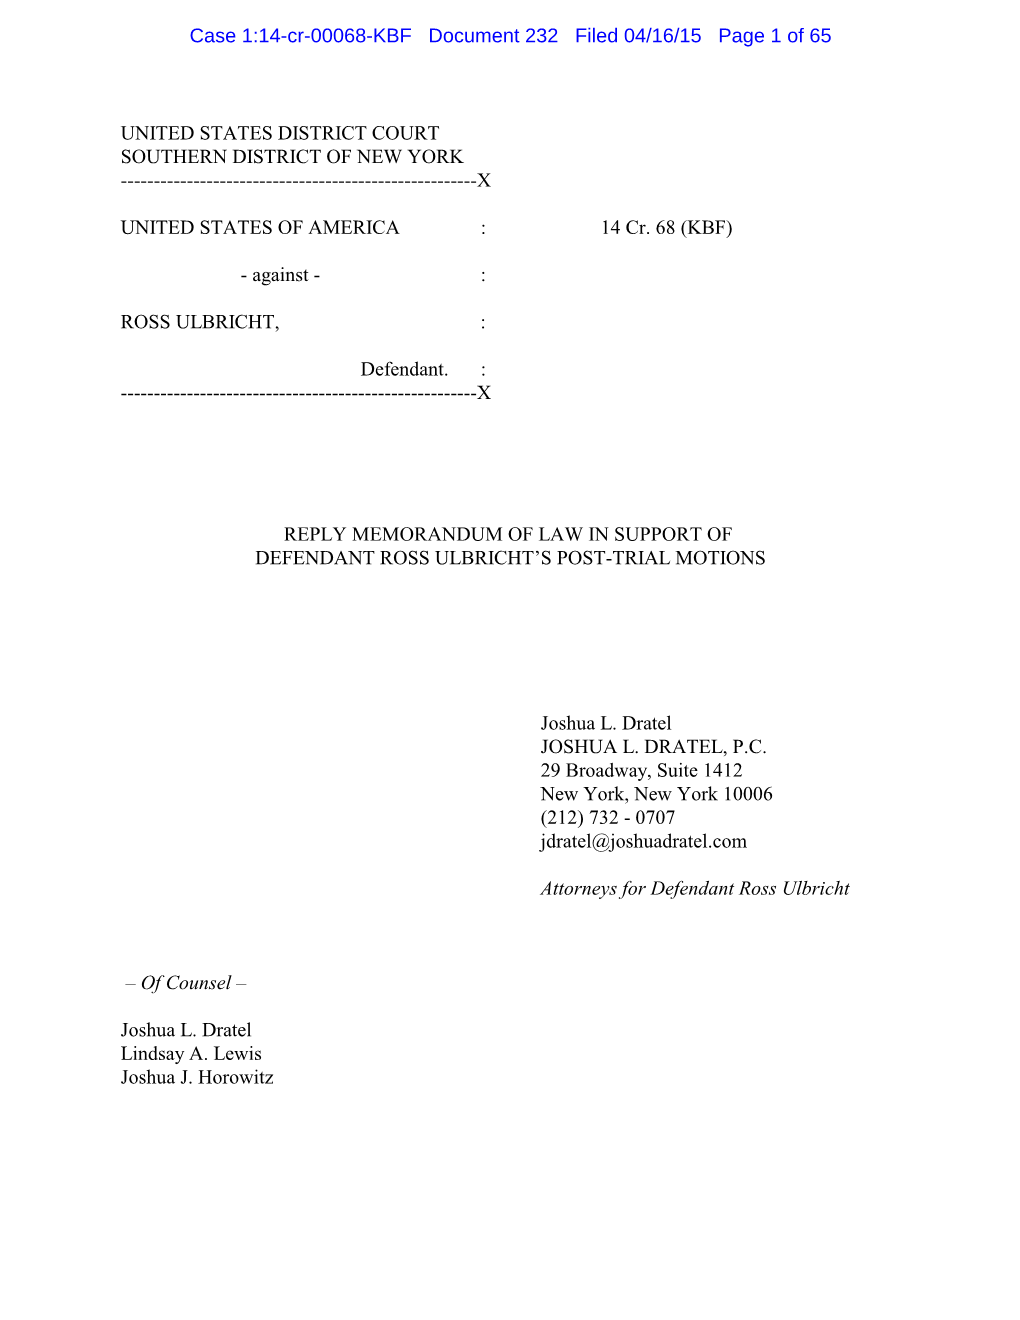 Reply Memorandum of Law in Support of Defendant Ross Ulbricht’S Post-Trial Motions